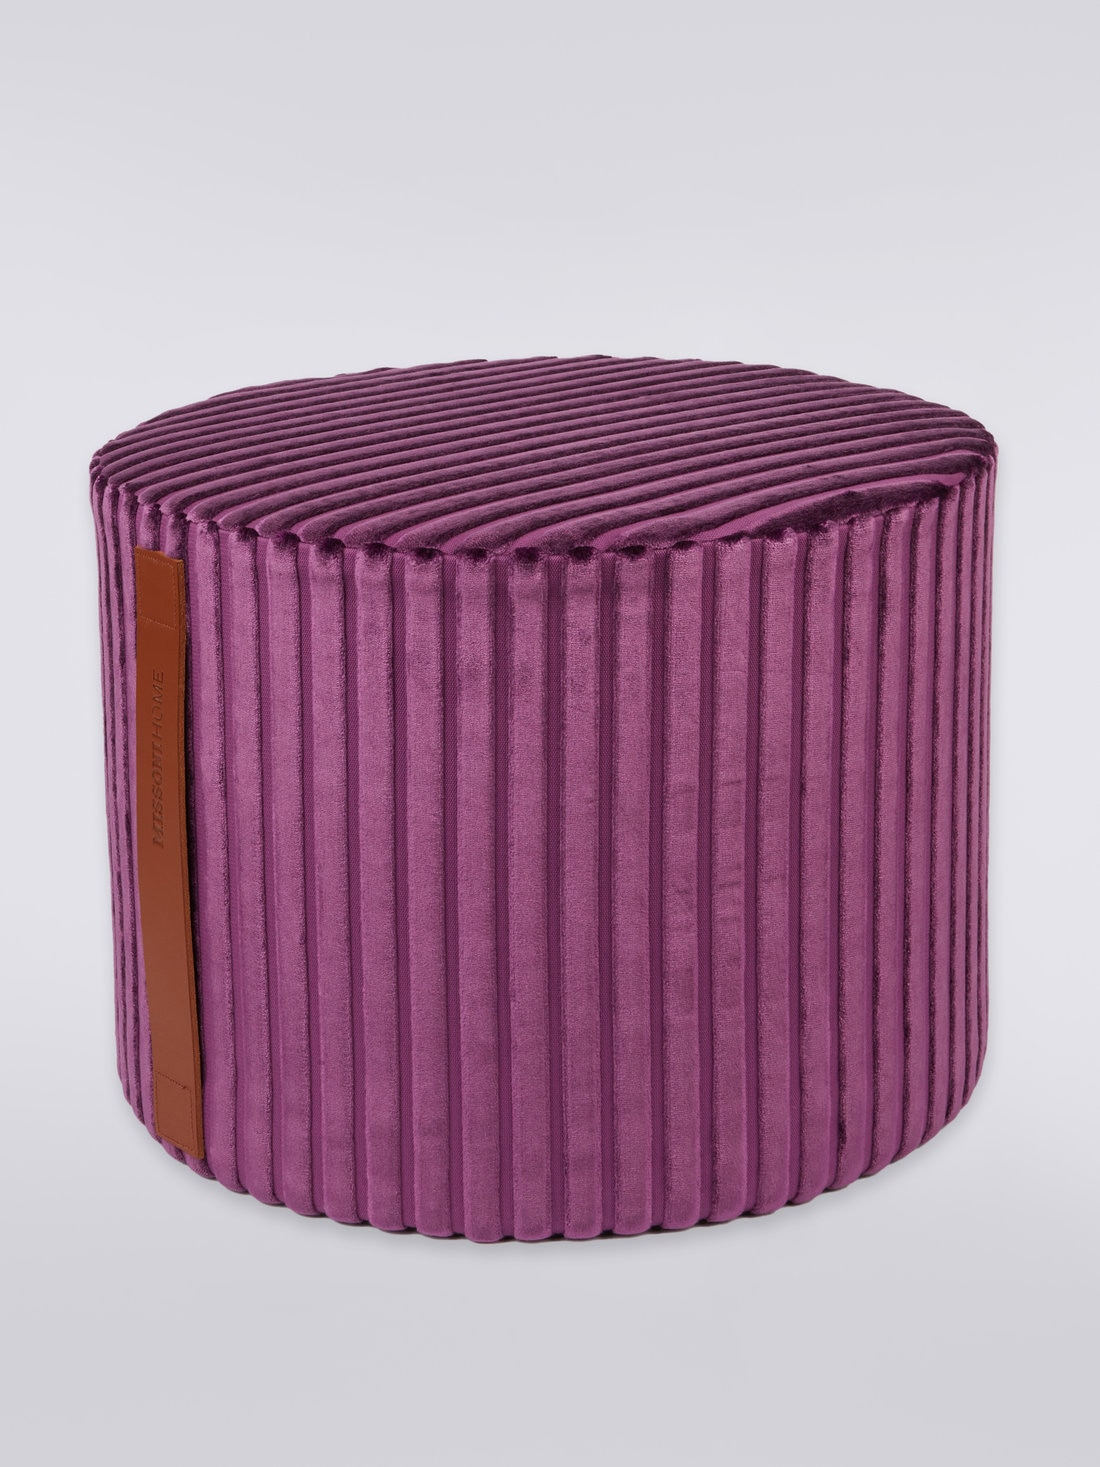 Coomba Cylinder Pouf 40X30, Purple  - 8033050076673 - 0